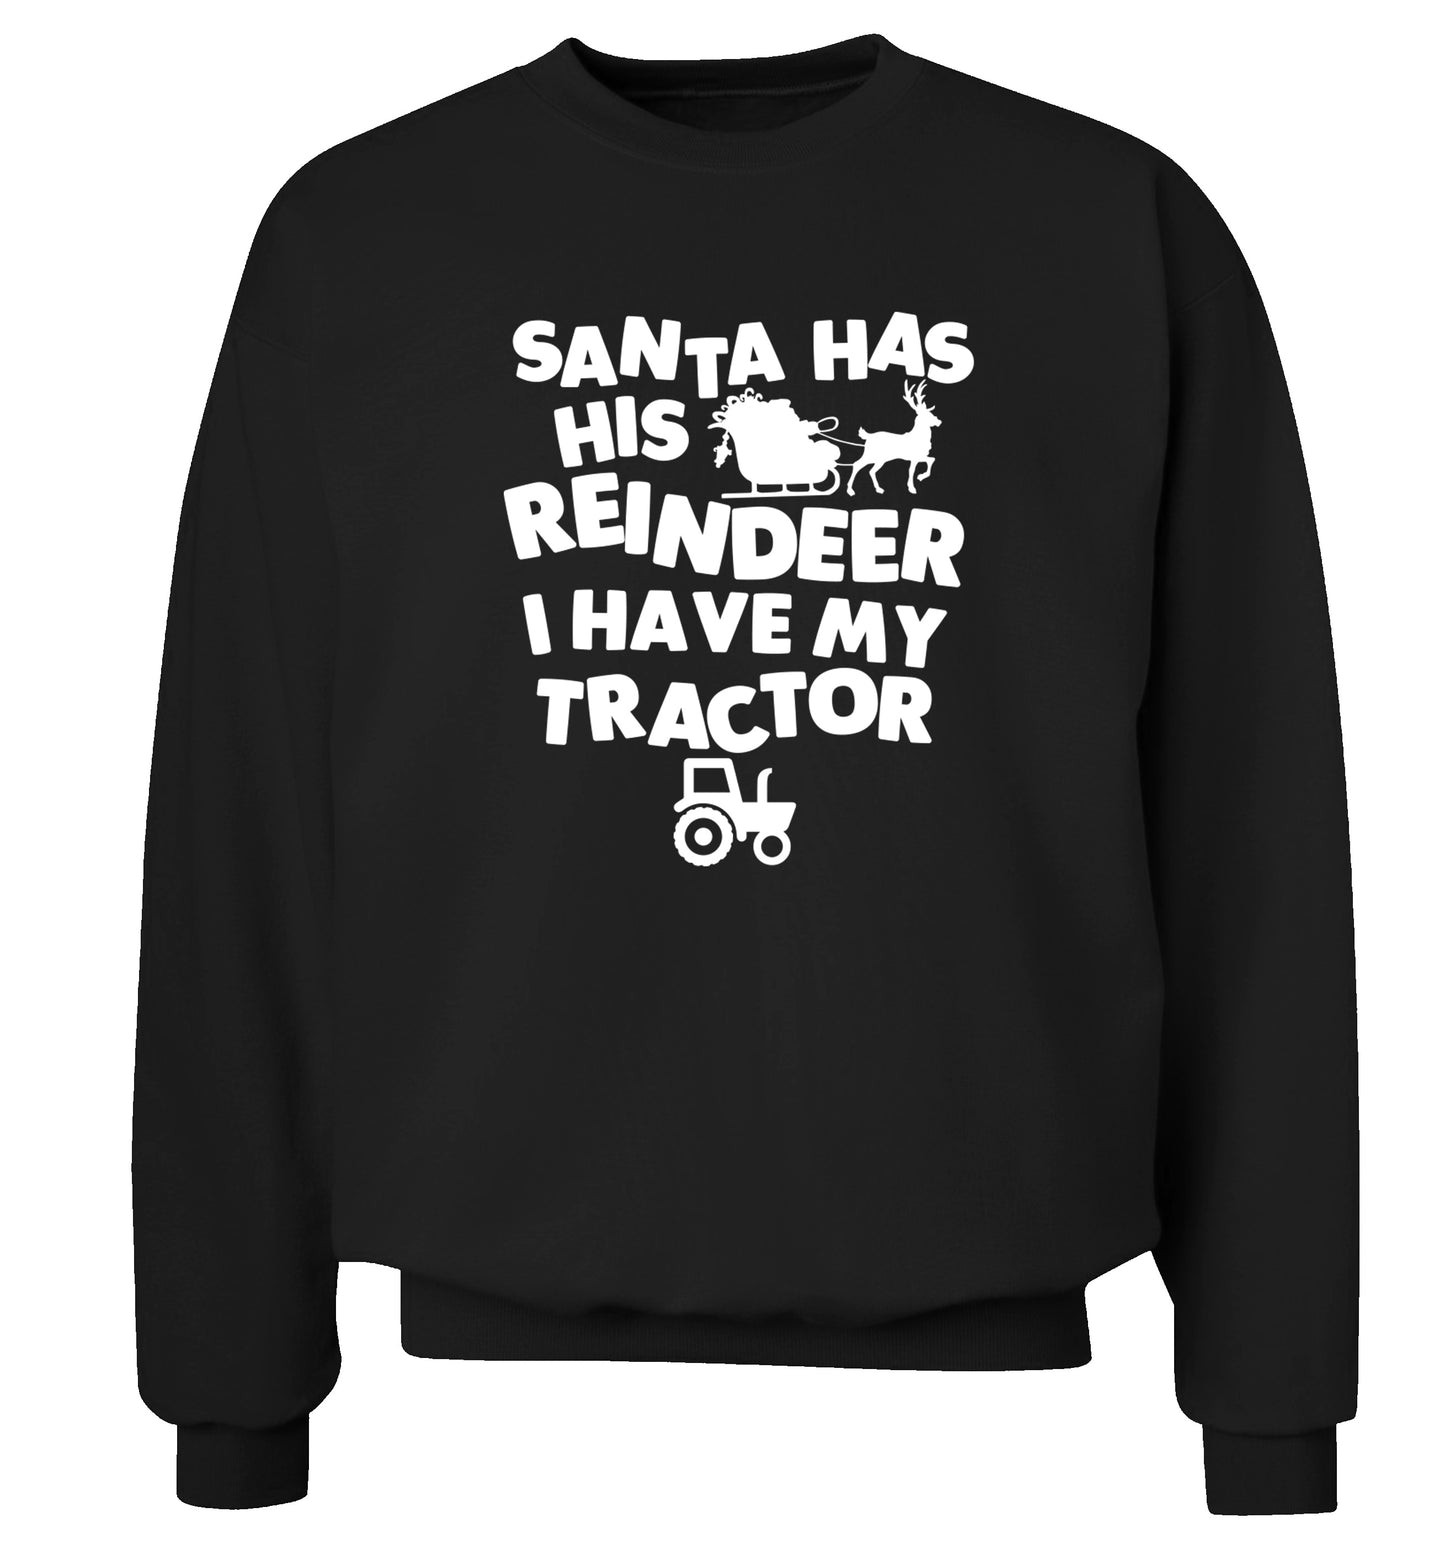 Santa has his reindeer I have my tractor Adult's unisex black Sweater 2XL